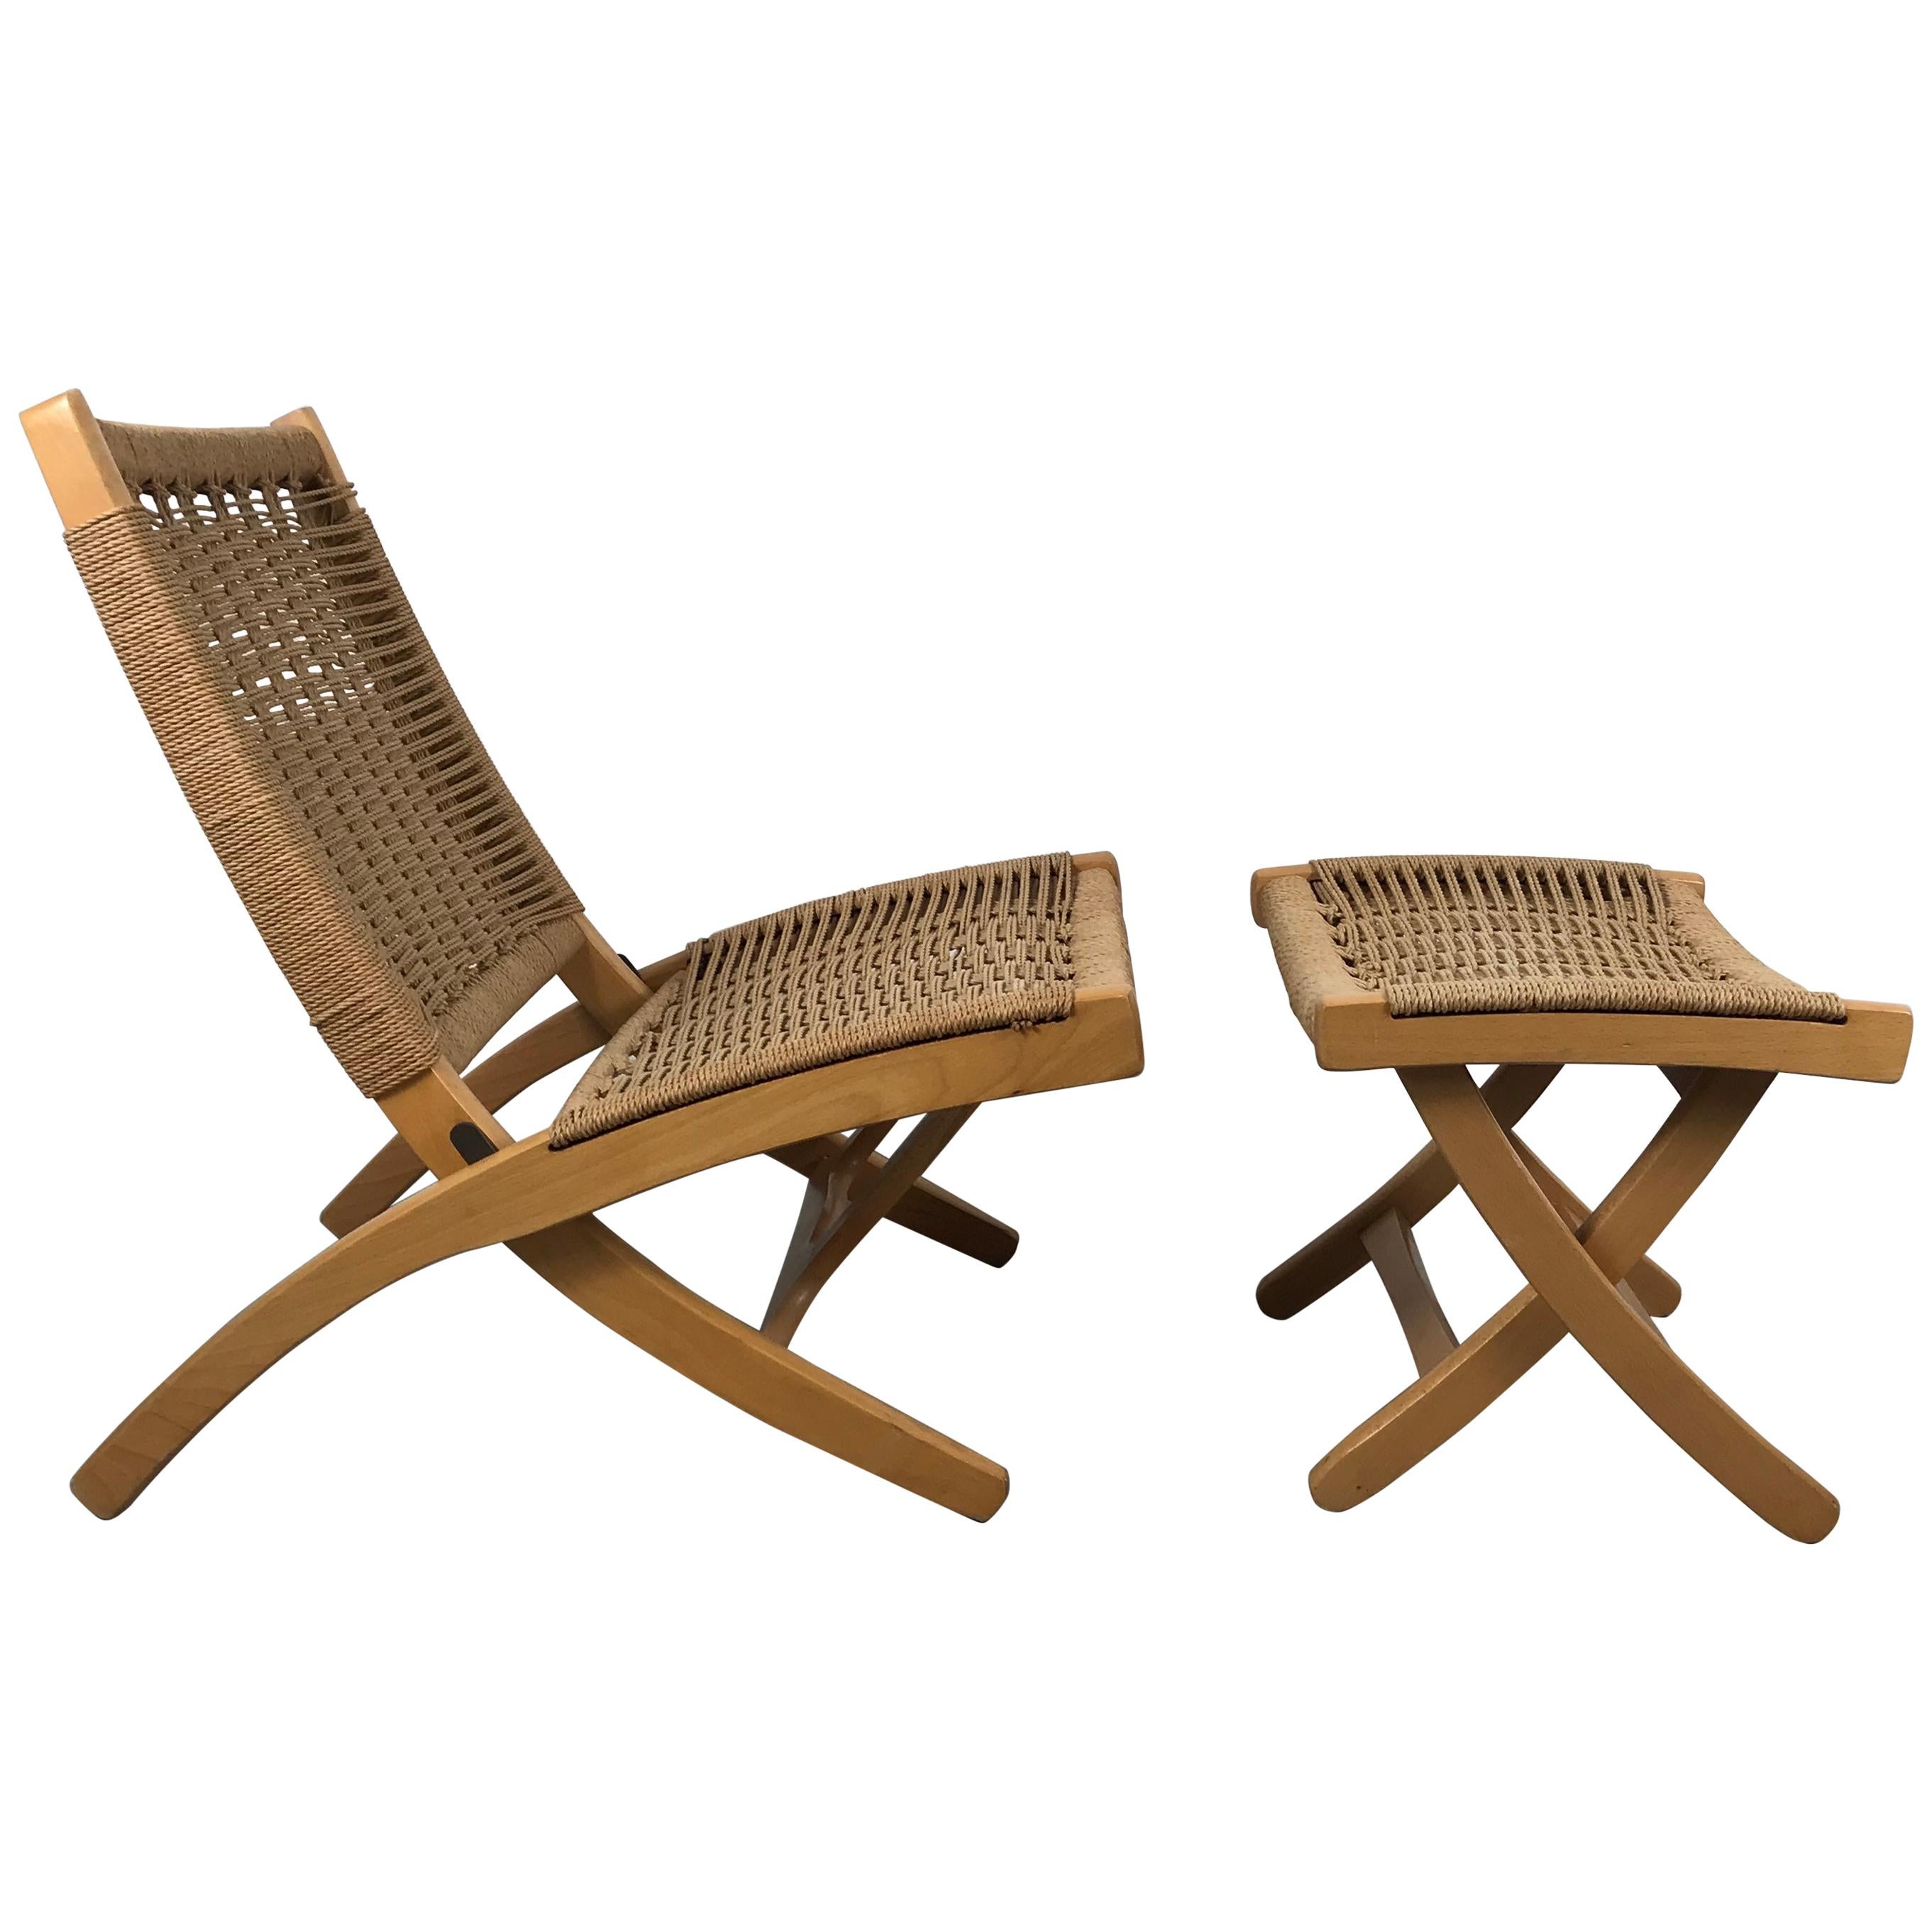 Woven Teak and Rope Folding Chair and Ottoman